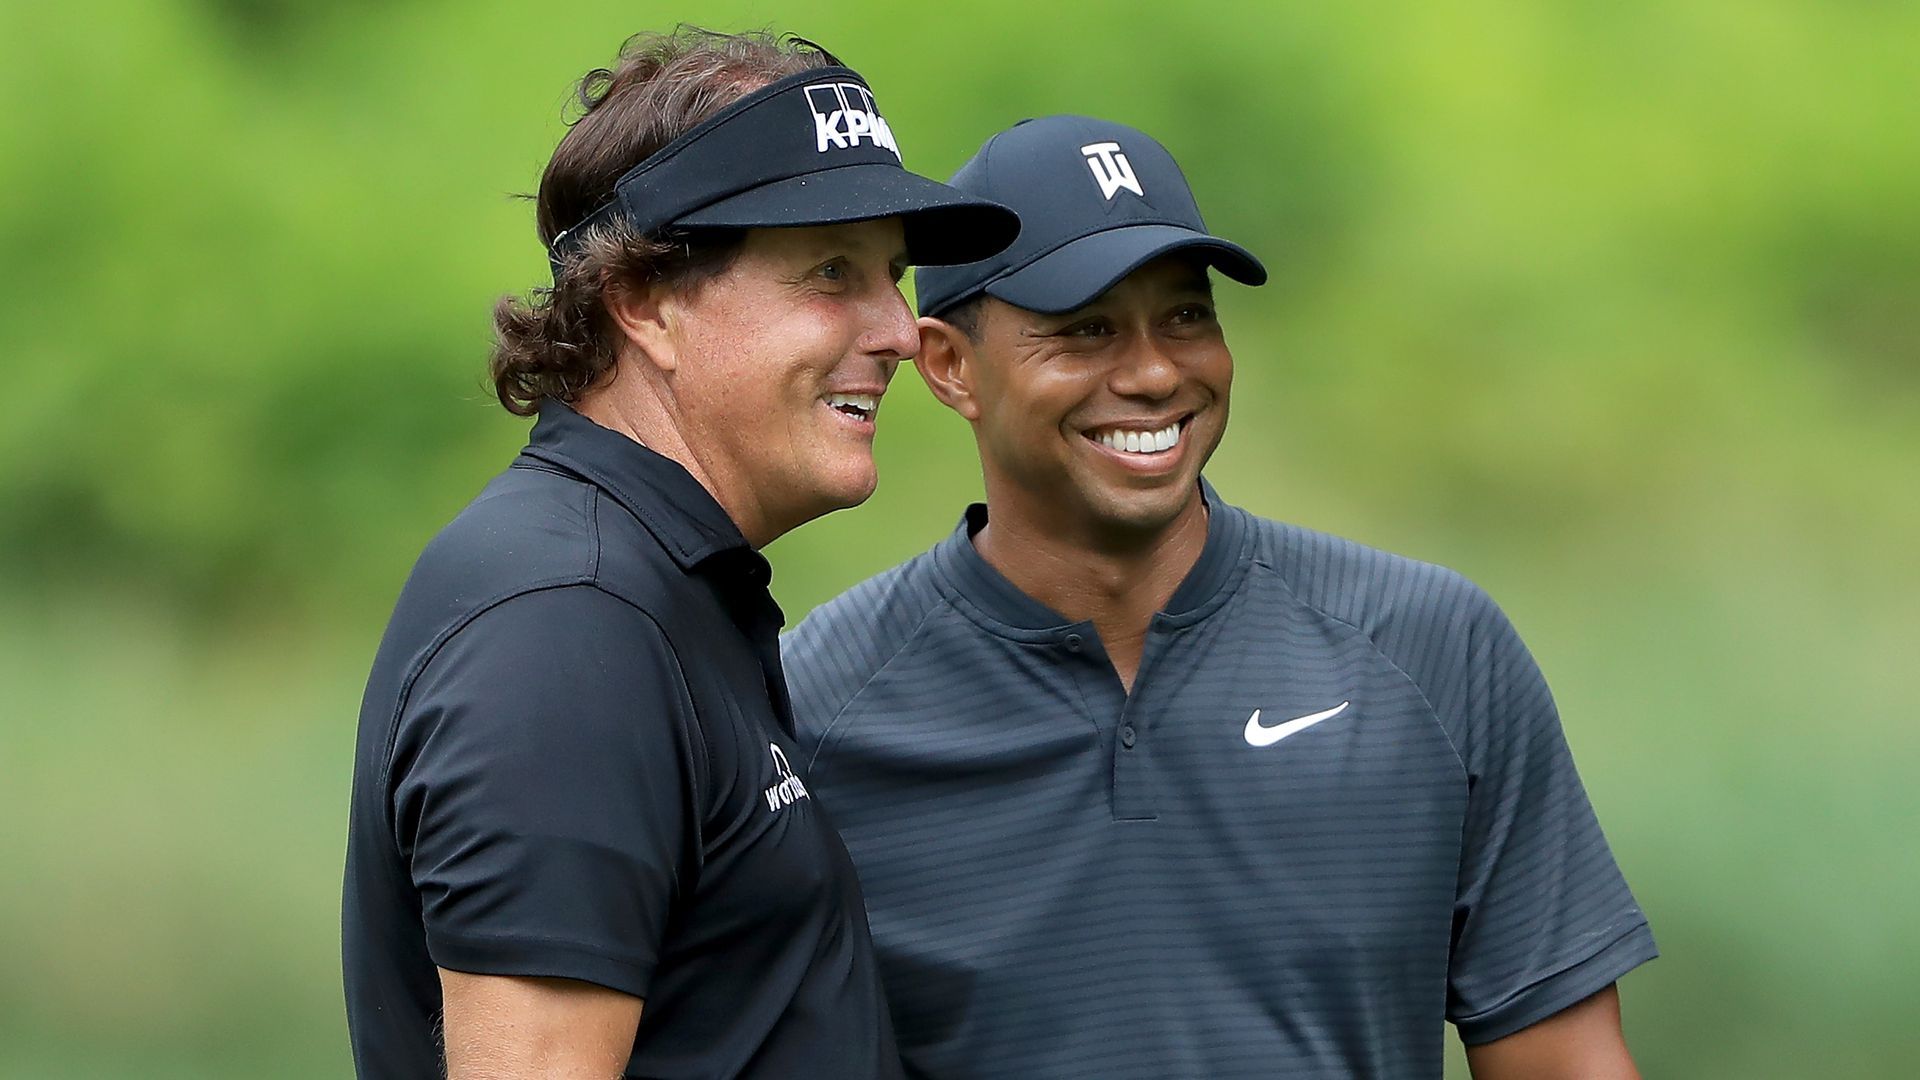 Mickelson and Woods during the 2018 WGC-Bridgestone Invitational at Firestone Country Club in Akron, Ohio.